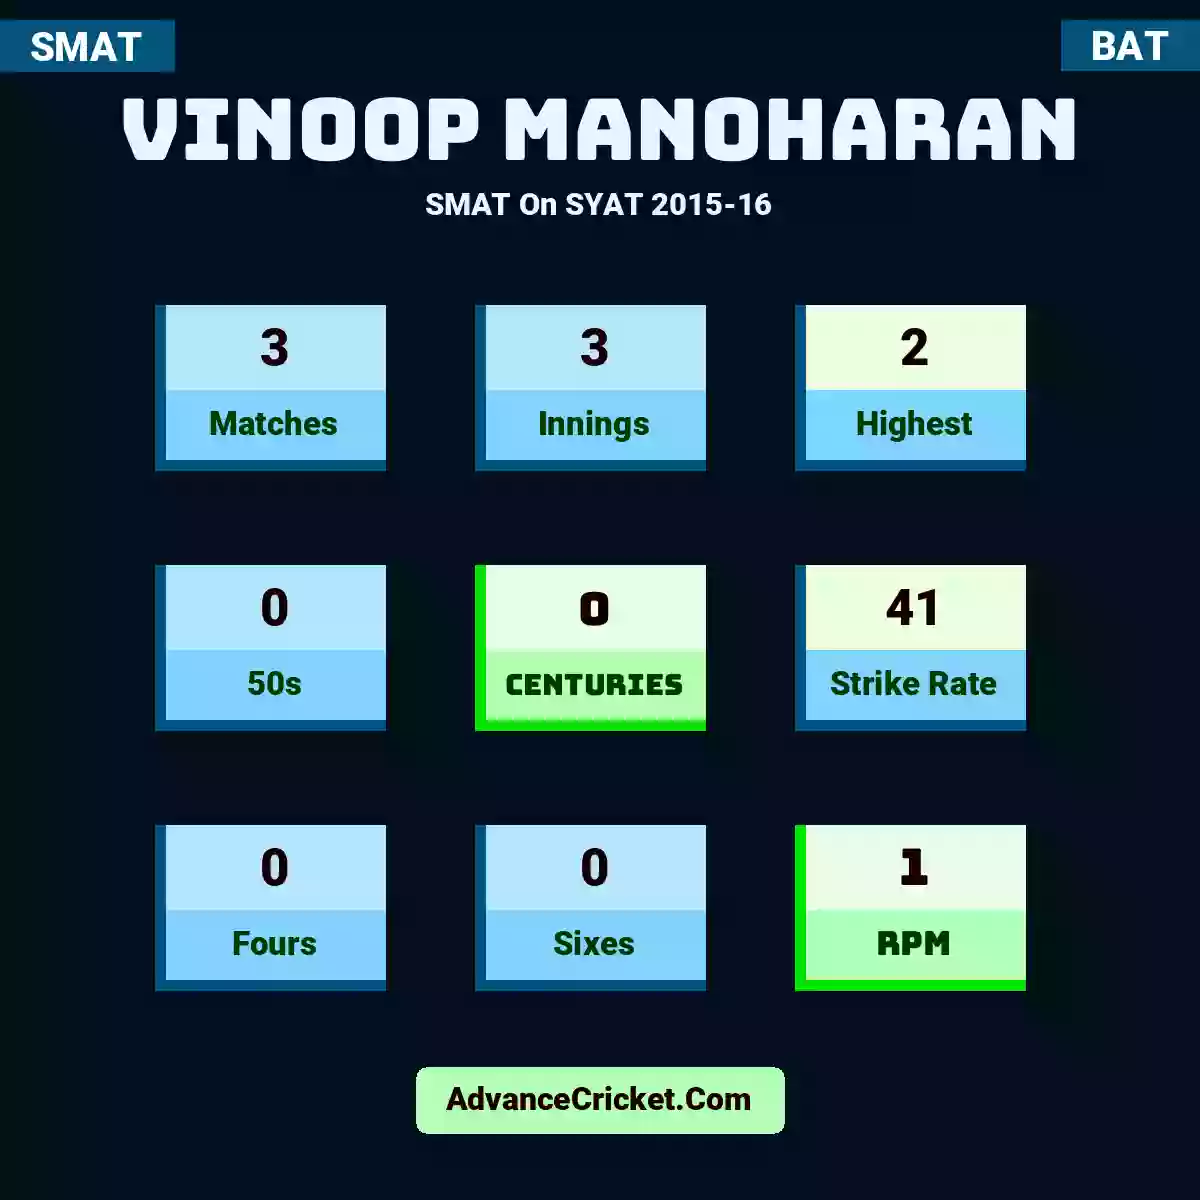 Vinoop Manoharan SMAT  On SYAT 2015-16, Vinoop Manoharan played 3 matches, scored 2 runs as highest, 0 half-centuries, and 0 centuries, with a strike rate of 41. V.Manoharan hit 0 fours and 0 sixes, with an RPM of 1.